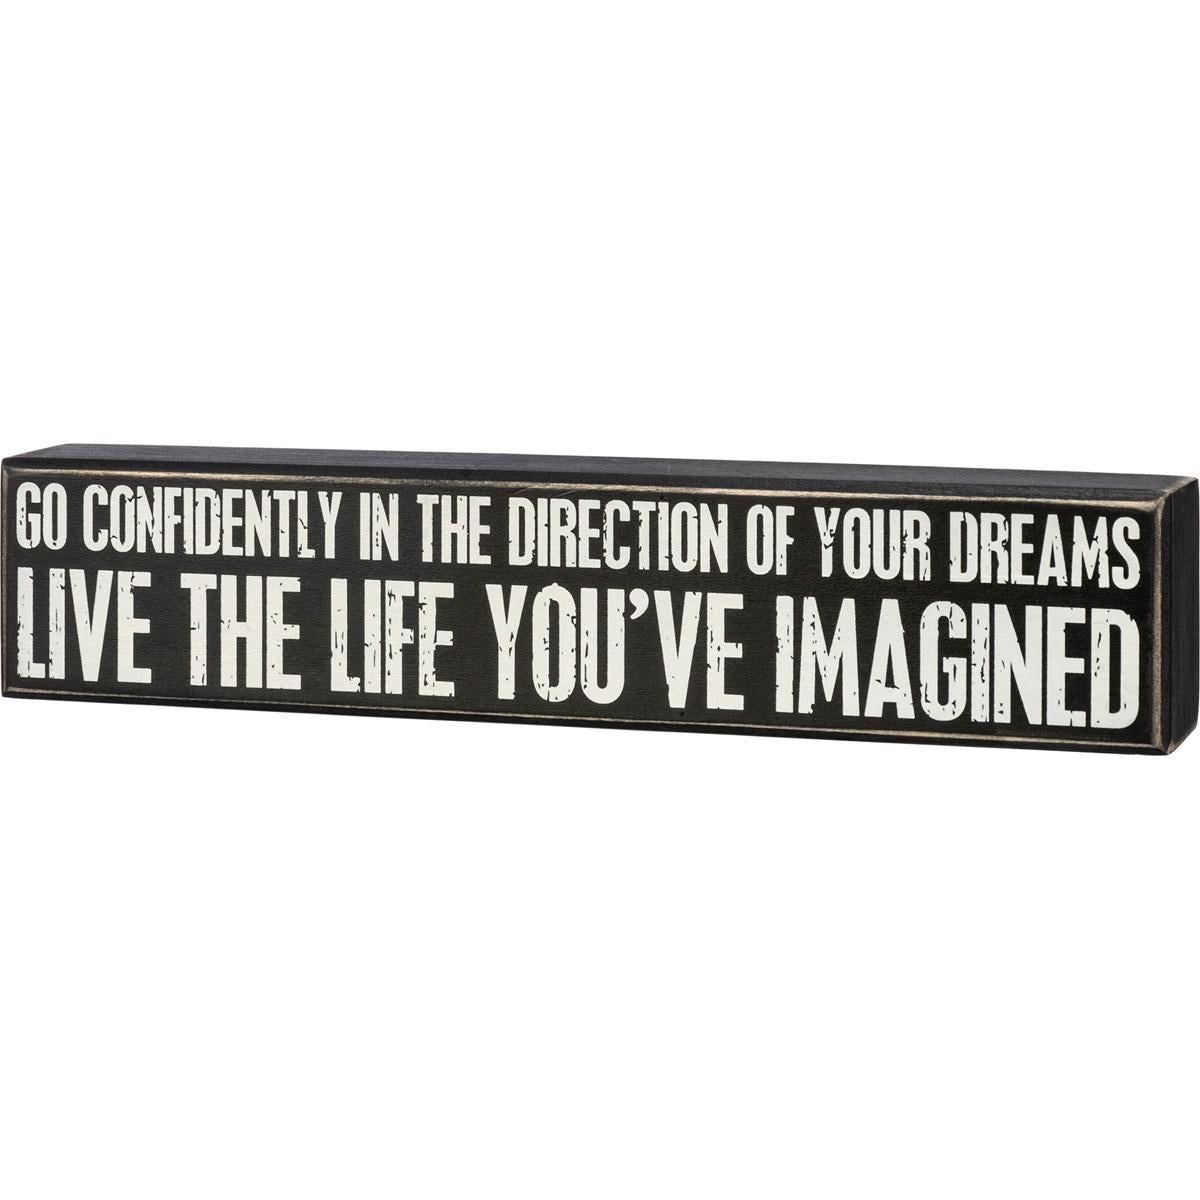 Go Confidently In The Direction Of Your Dreams Live The Life You've Imagined Sign